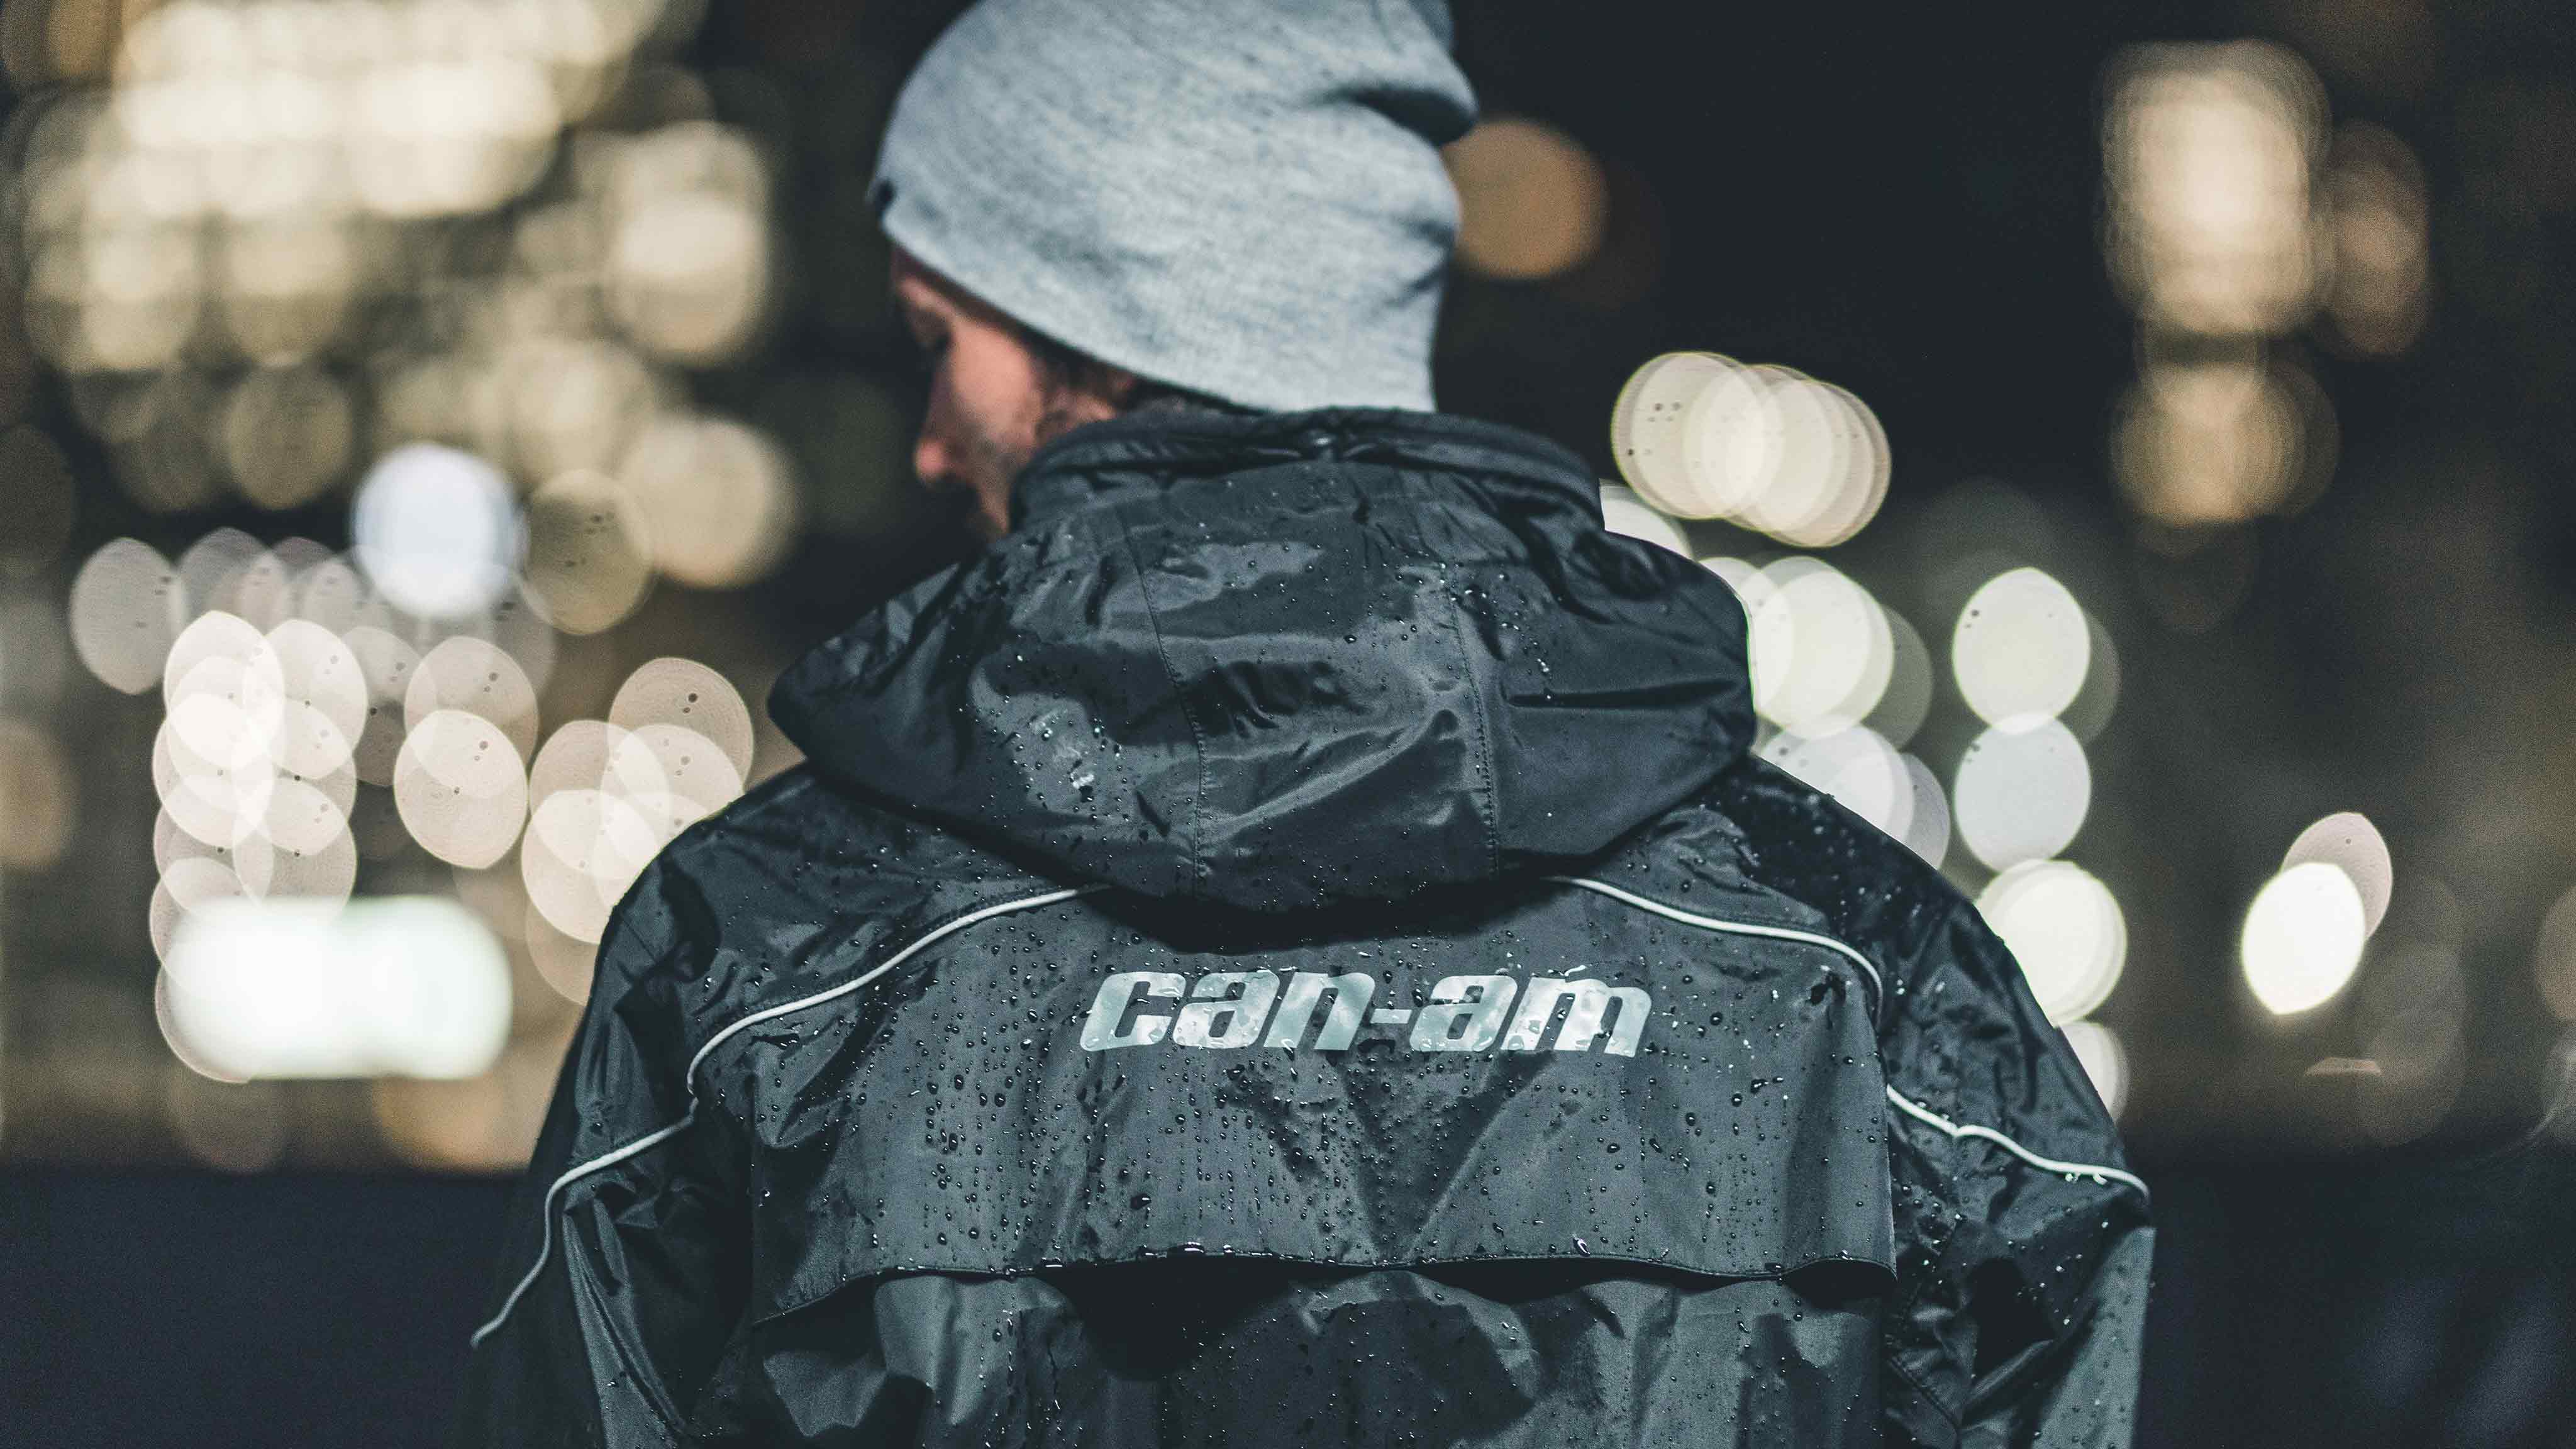 Back of rider wearing Can-Am On-Road raingear